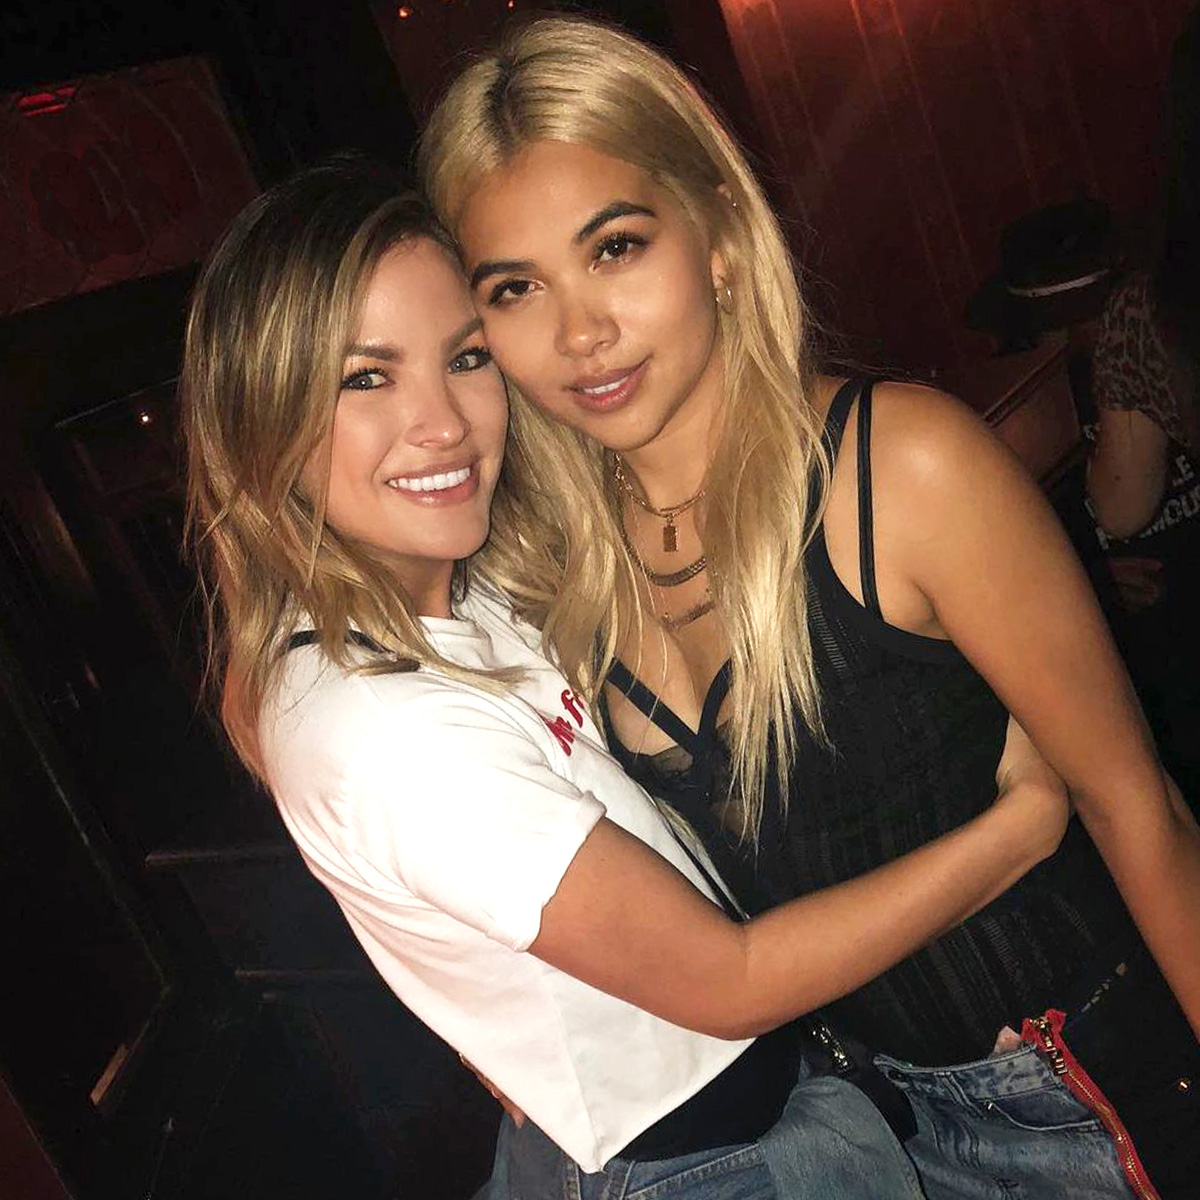 https://akns-images.eonline.com/eol_images/Entire_Site/2022421/rs_1200x1200-220521120333-1200.Becca-Tilley-Hayley-Kiyoko-IG4.jpg?fit=around%7C1200:1200&output-quality=90&crop=1200:1200;center,top